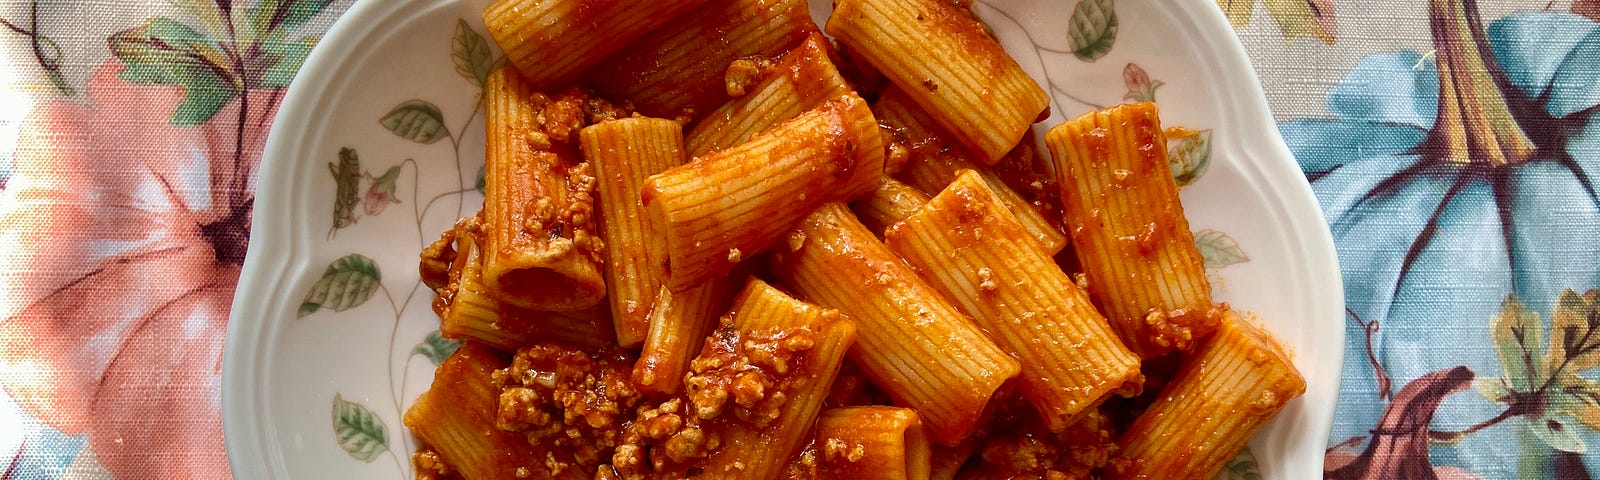 Rigatoni pasta coated in a meat-based Sunday sauce and served at the Italian American table. Photo by Francesca Di Meglio